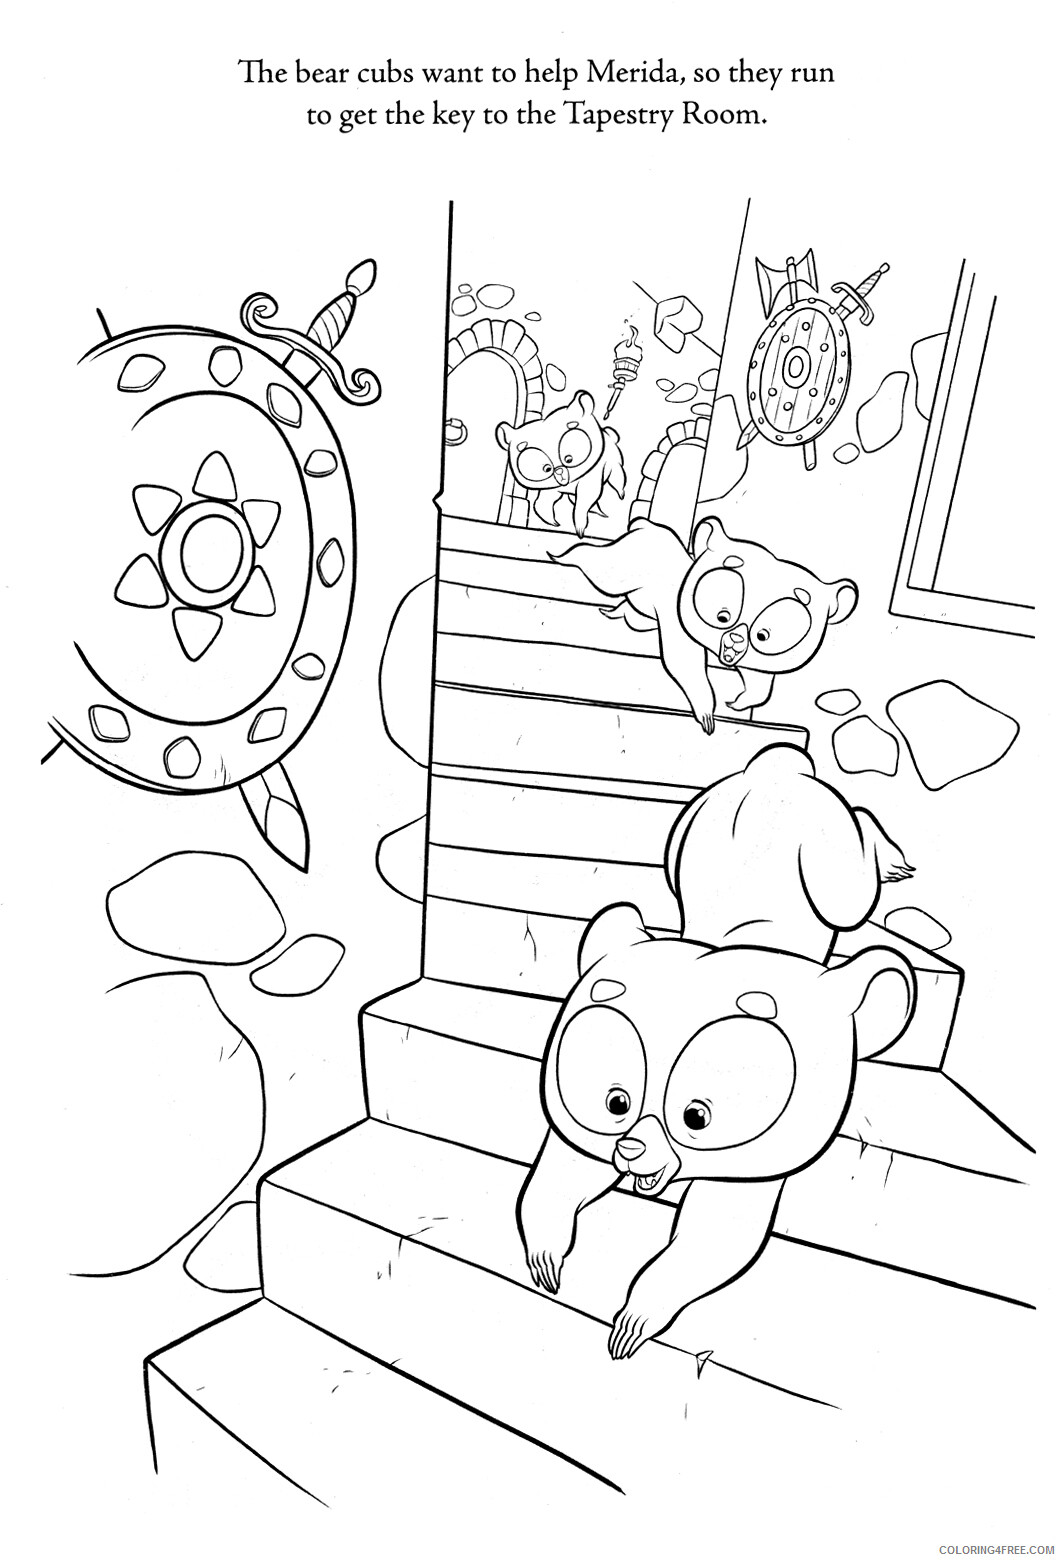 Brother Bear Coloring Pages TV Film Brave brother bears Printable 2020 01422 Coloring4free